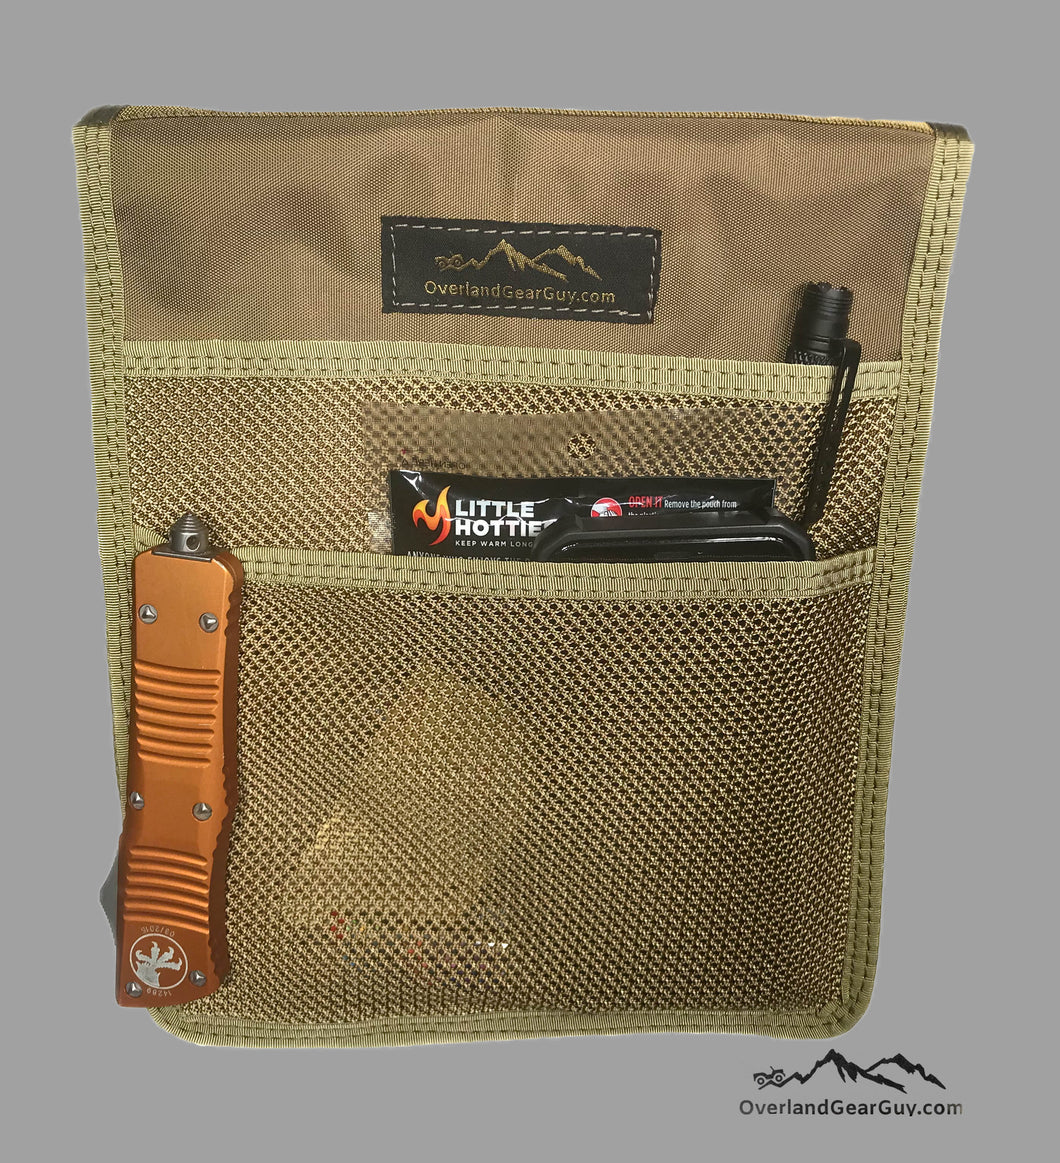 Roof Top Tent Tan Storage Bag by Overland Gear Guy, Coyote Mesh Storage Pocket